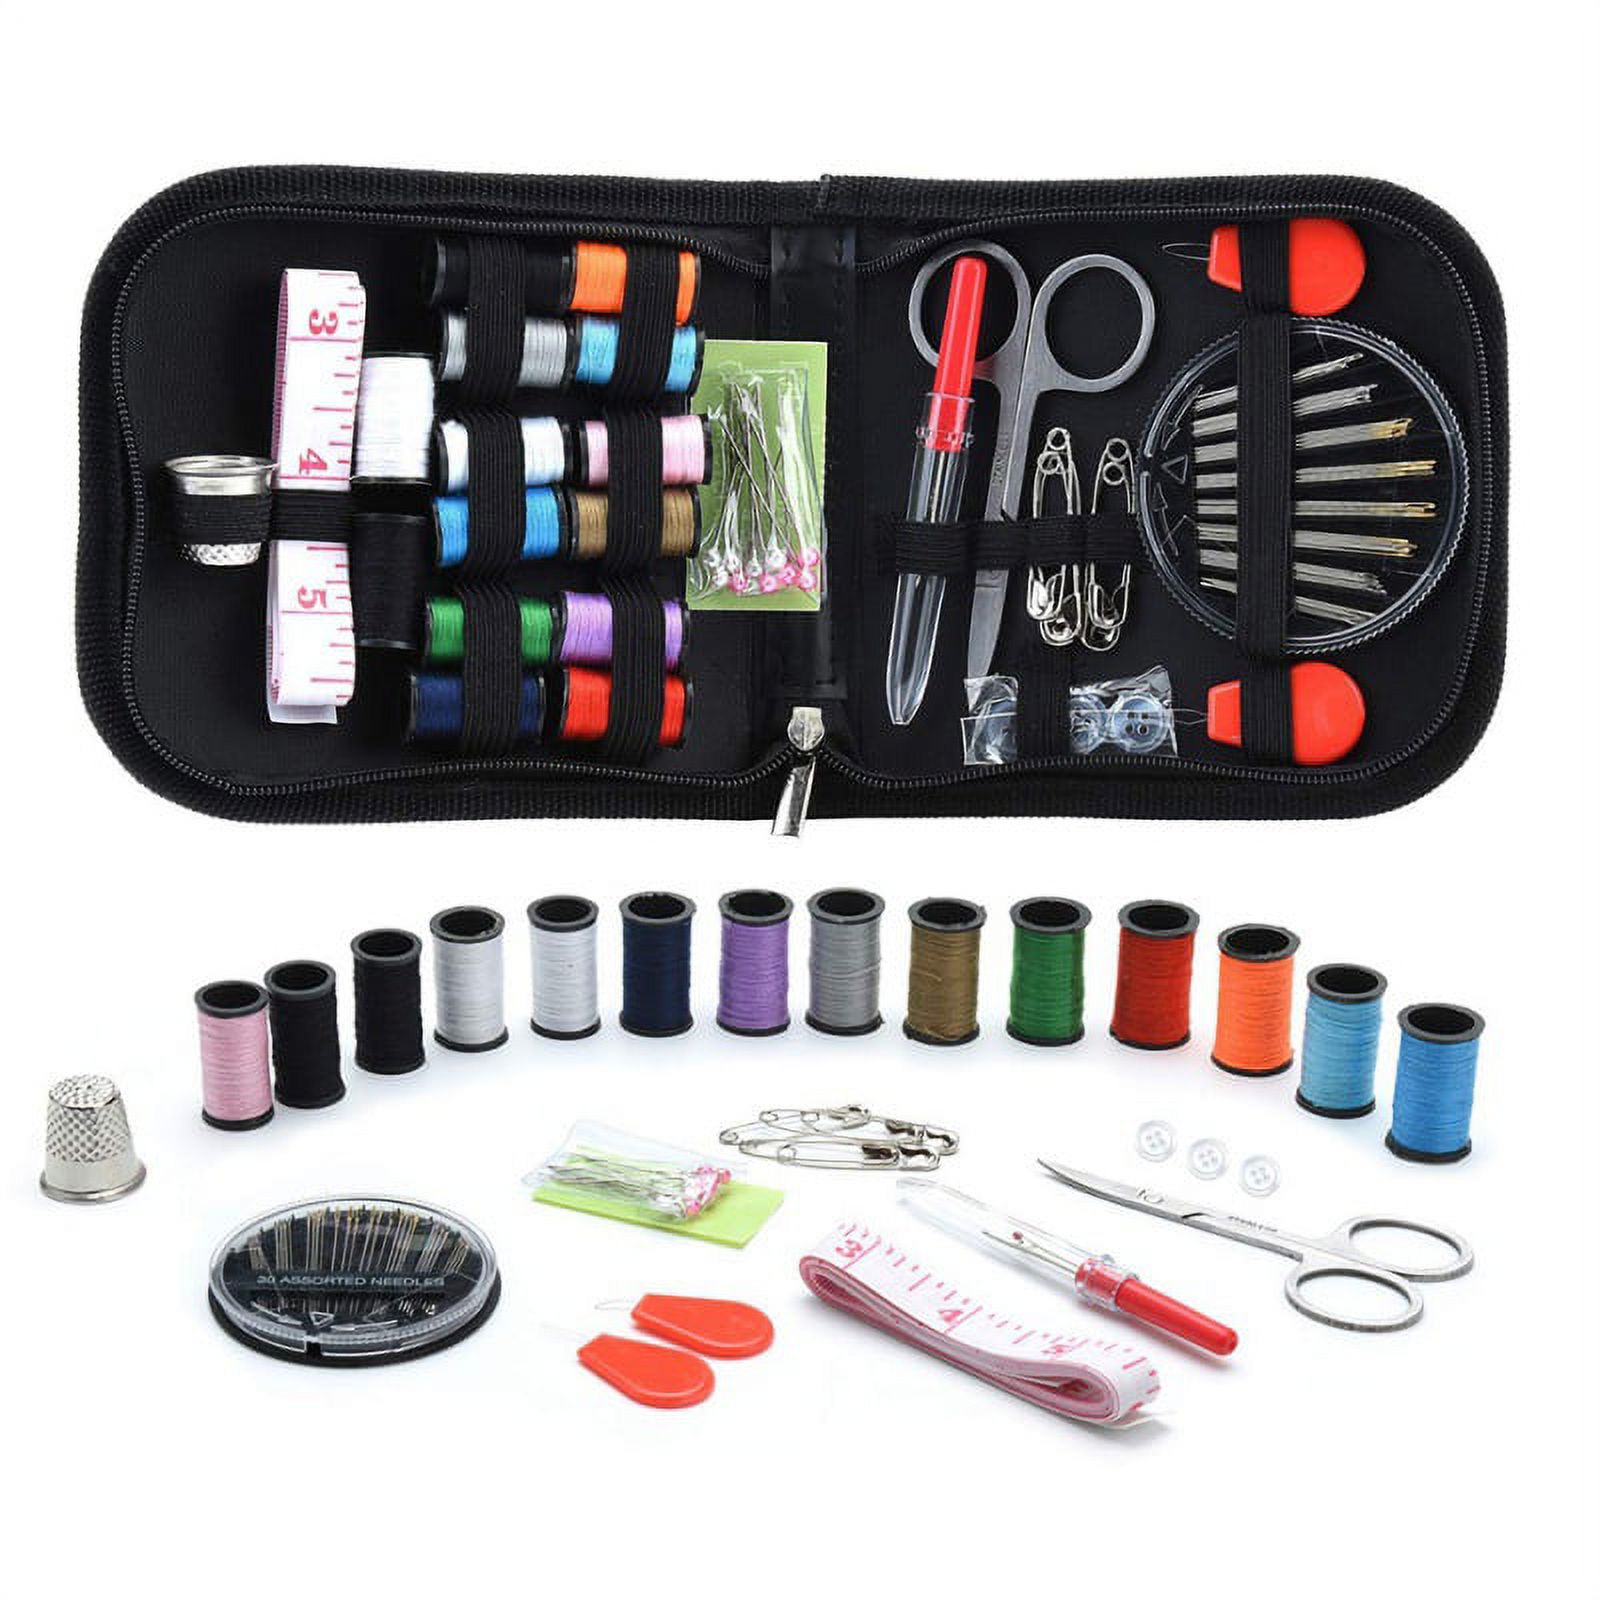 SEWING KIT,DIY Sewing Supplies & Sewing Accessories with Black Carrying  Case,Portable for DIY, Beginners, Emergency, Kids, students, dorm, Home  Travel